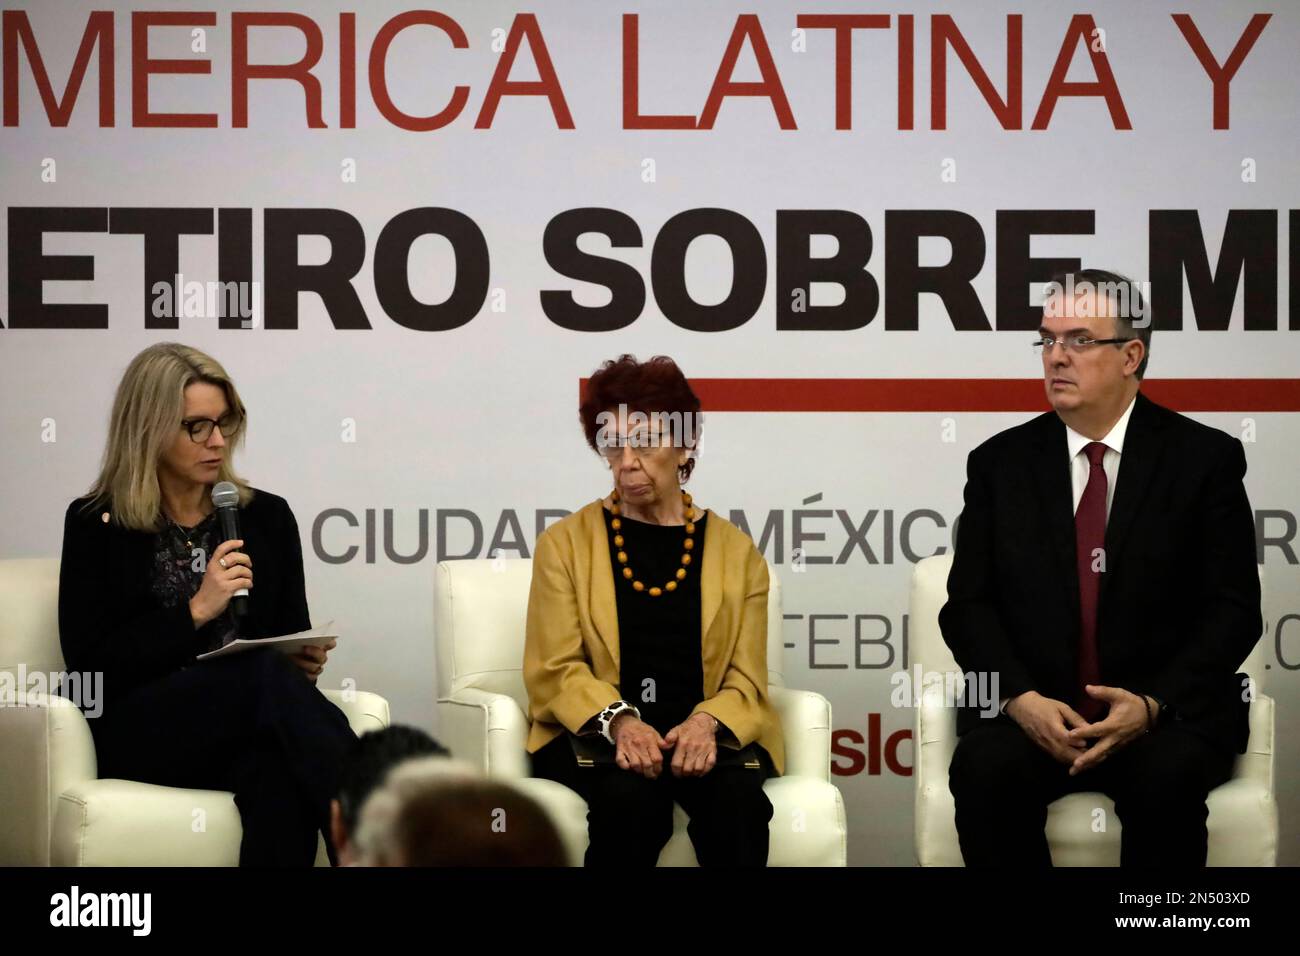 February 8, 2023, Mexico City, Mexico: The Norwegian ambassador to Mexico, Ragnhild Imerslund; the Undersecretary of Foreign Relations of Mexico, Carmen Moreno Toscano and the Foreign Minister of Mexico, Marcelo Ebrard at the inauguration of the Retreat on Mediation “Latin America and the Caribbean” at the Ministry of Foreign Relations in Mexico City. on February 8, 2023 in Mexico City, Mexico (Photo by Luis Barron / Eyepix Group). Stock Photo